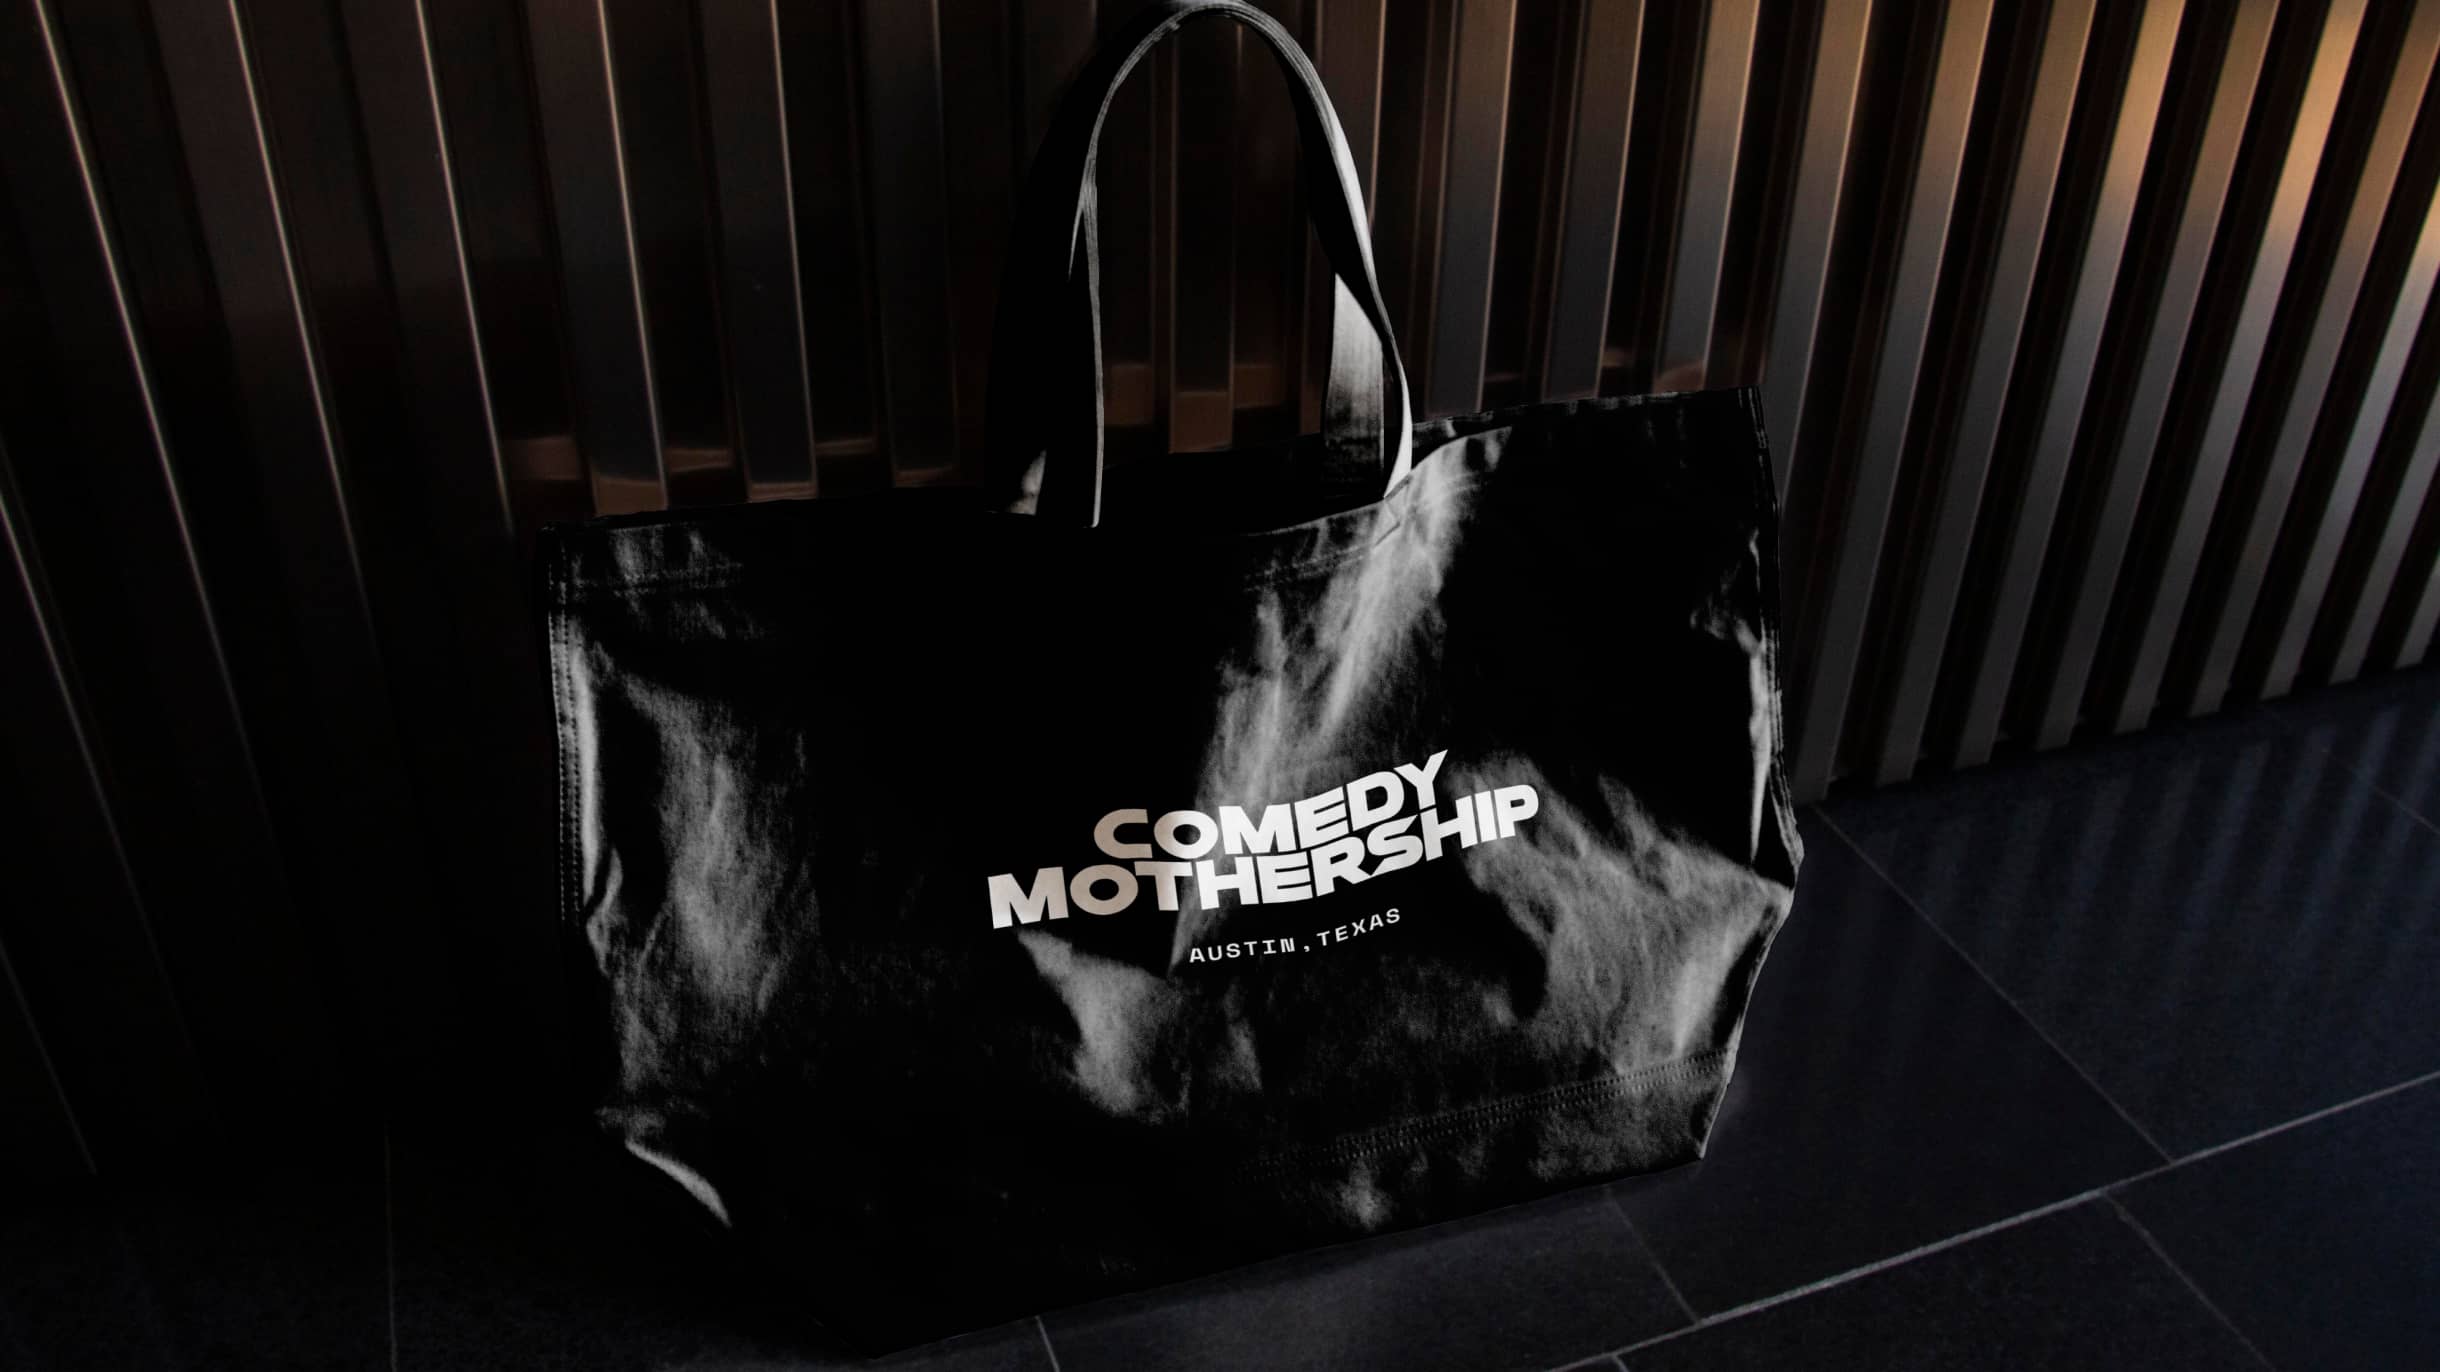 Tote bag with Comedy Mothership logo